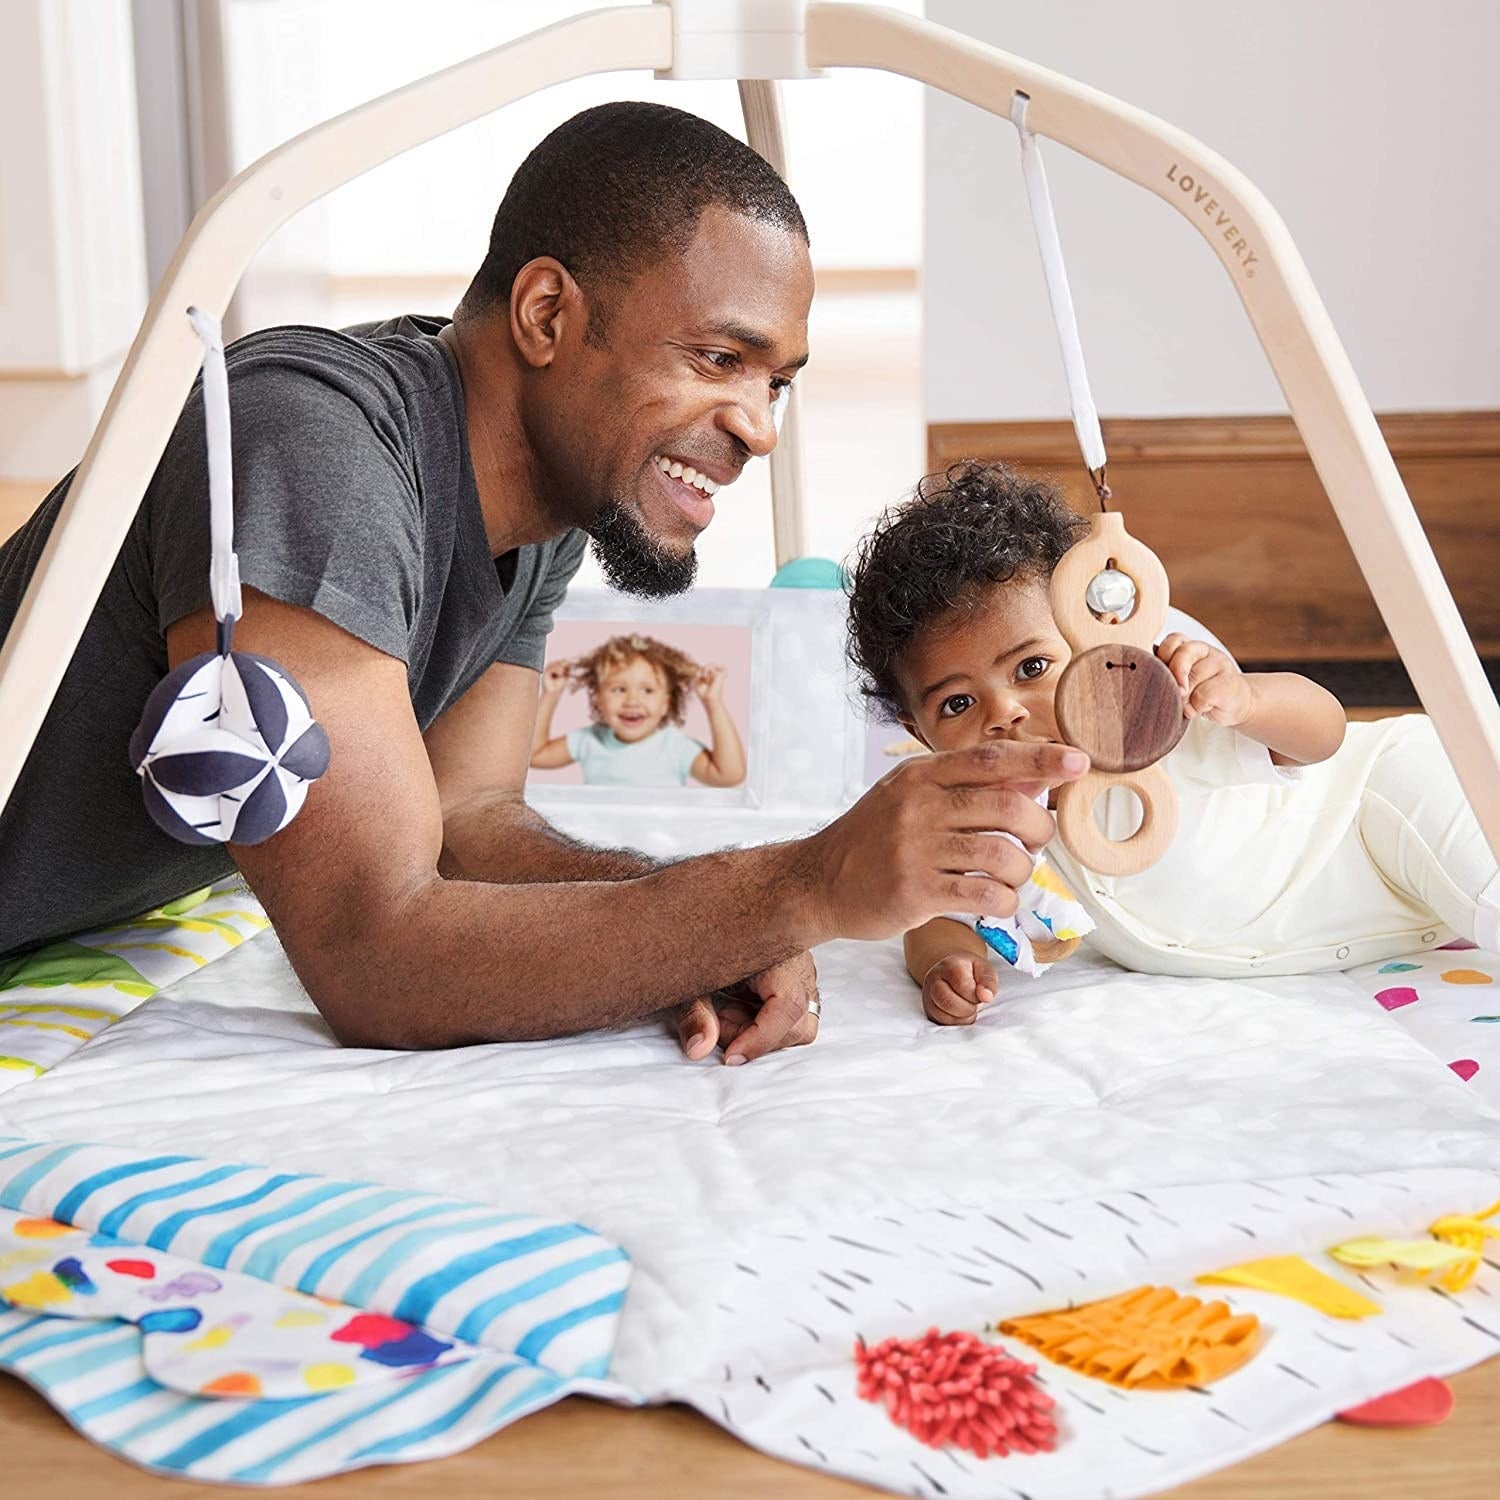 Model and child playing with hanging toys on play mat